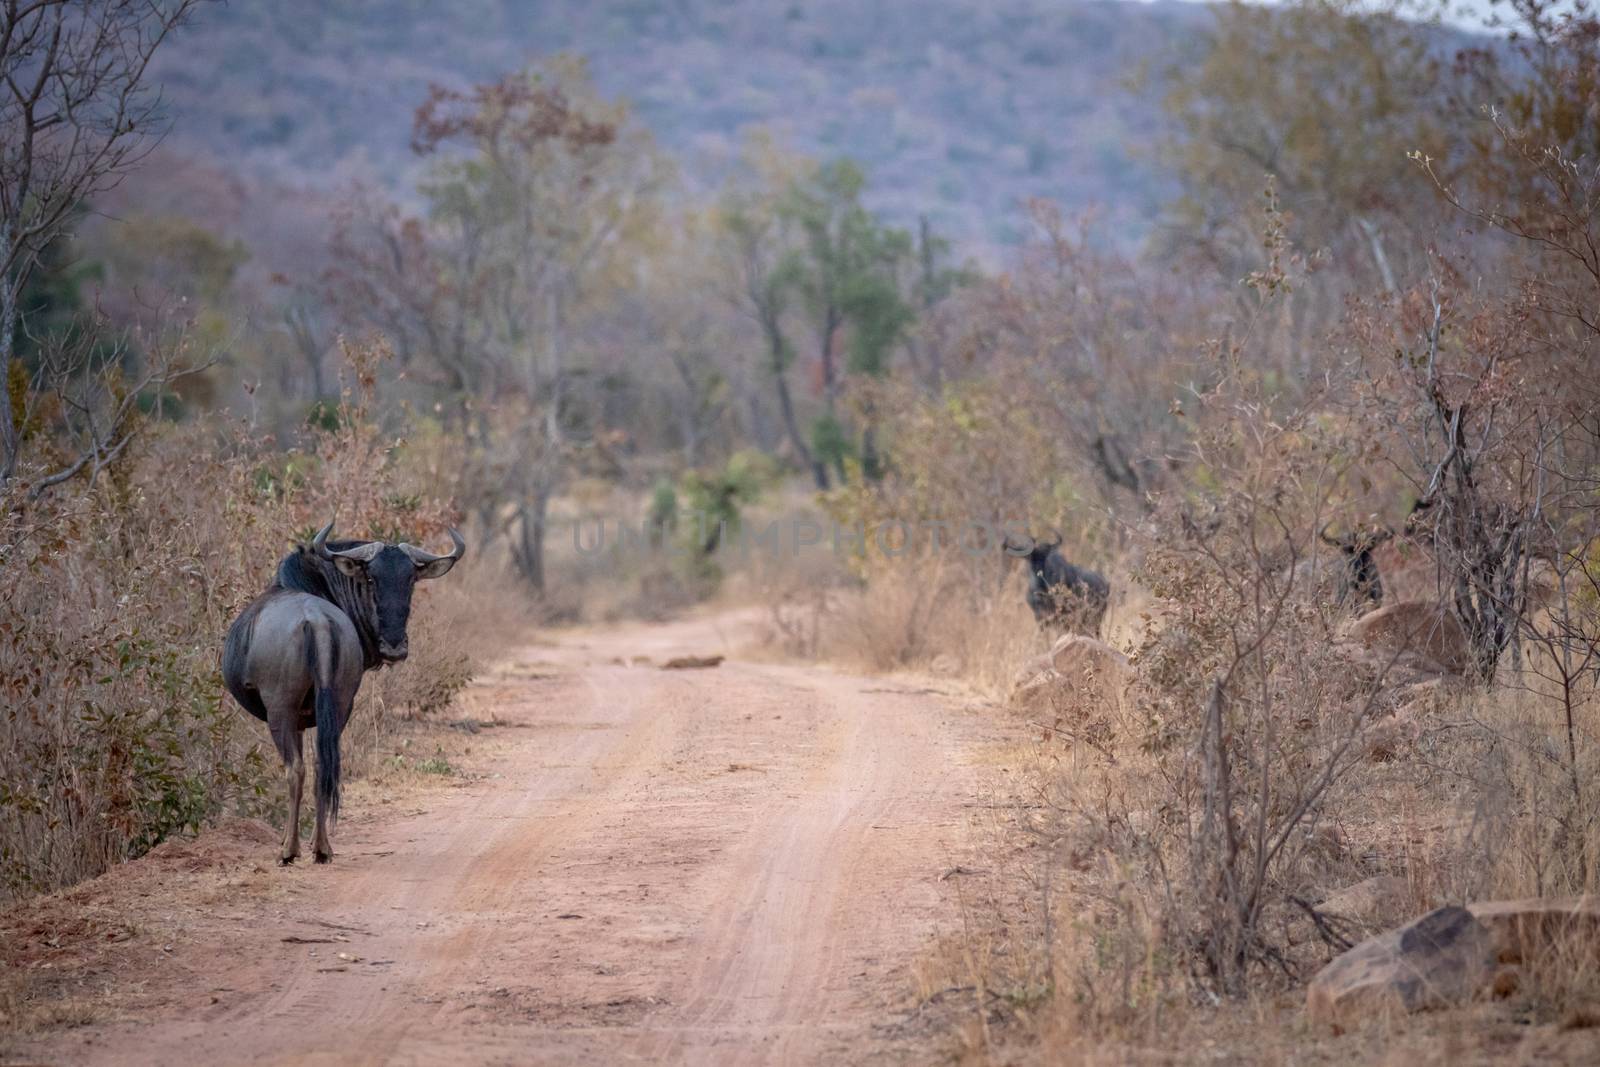 Blue Wildebeest standing in the road in the Welgevonden game reserve, South Africa.